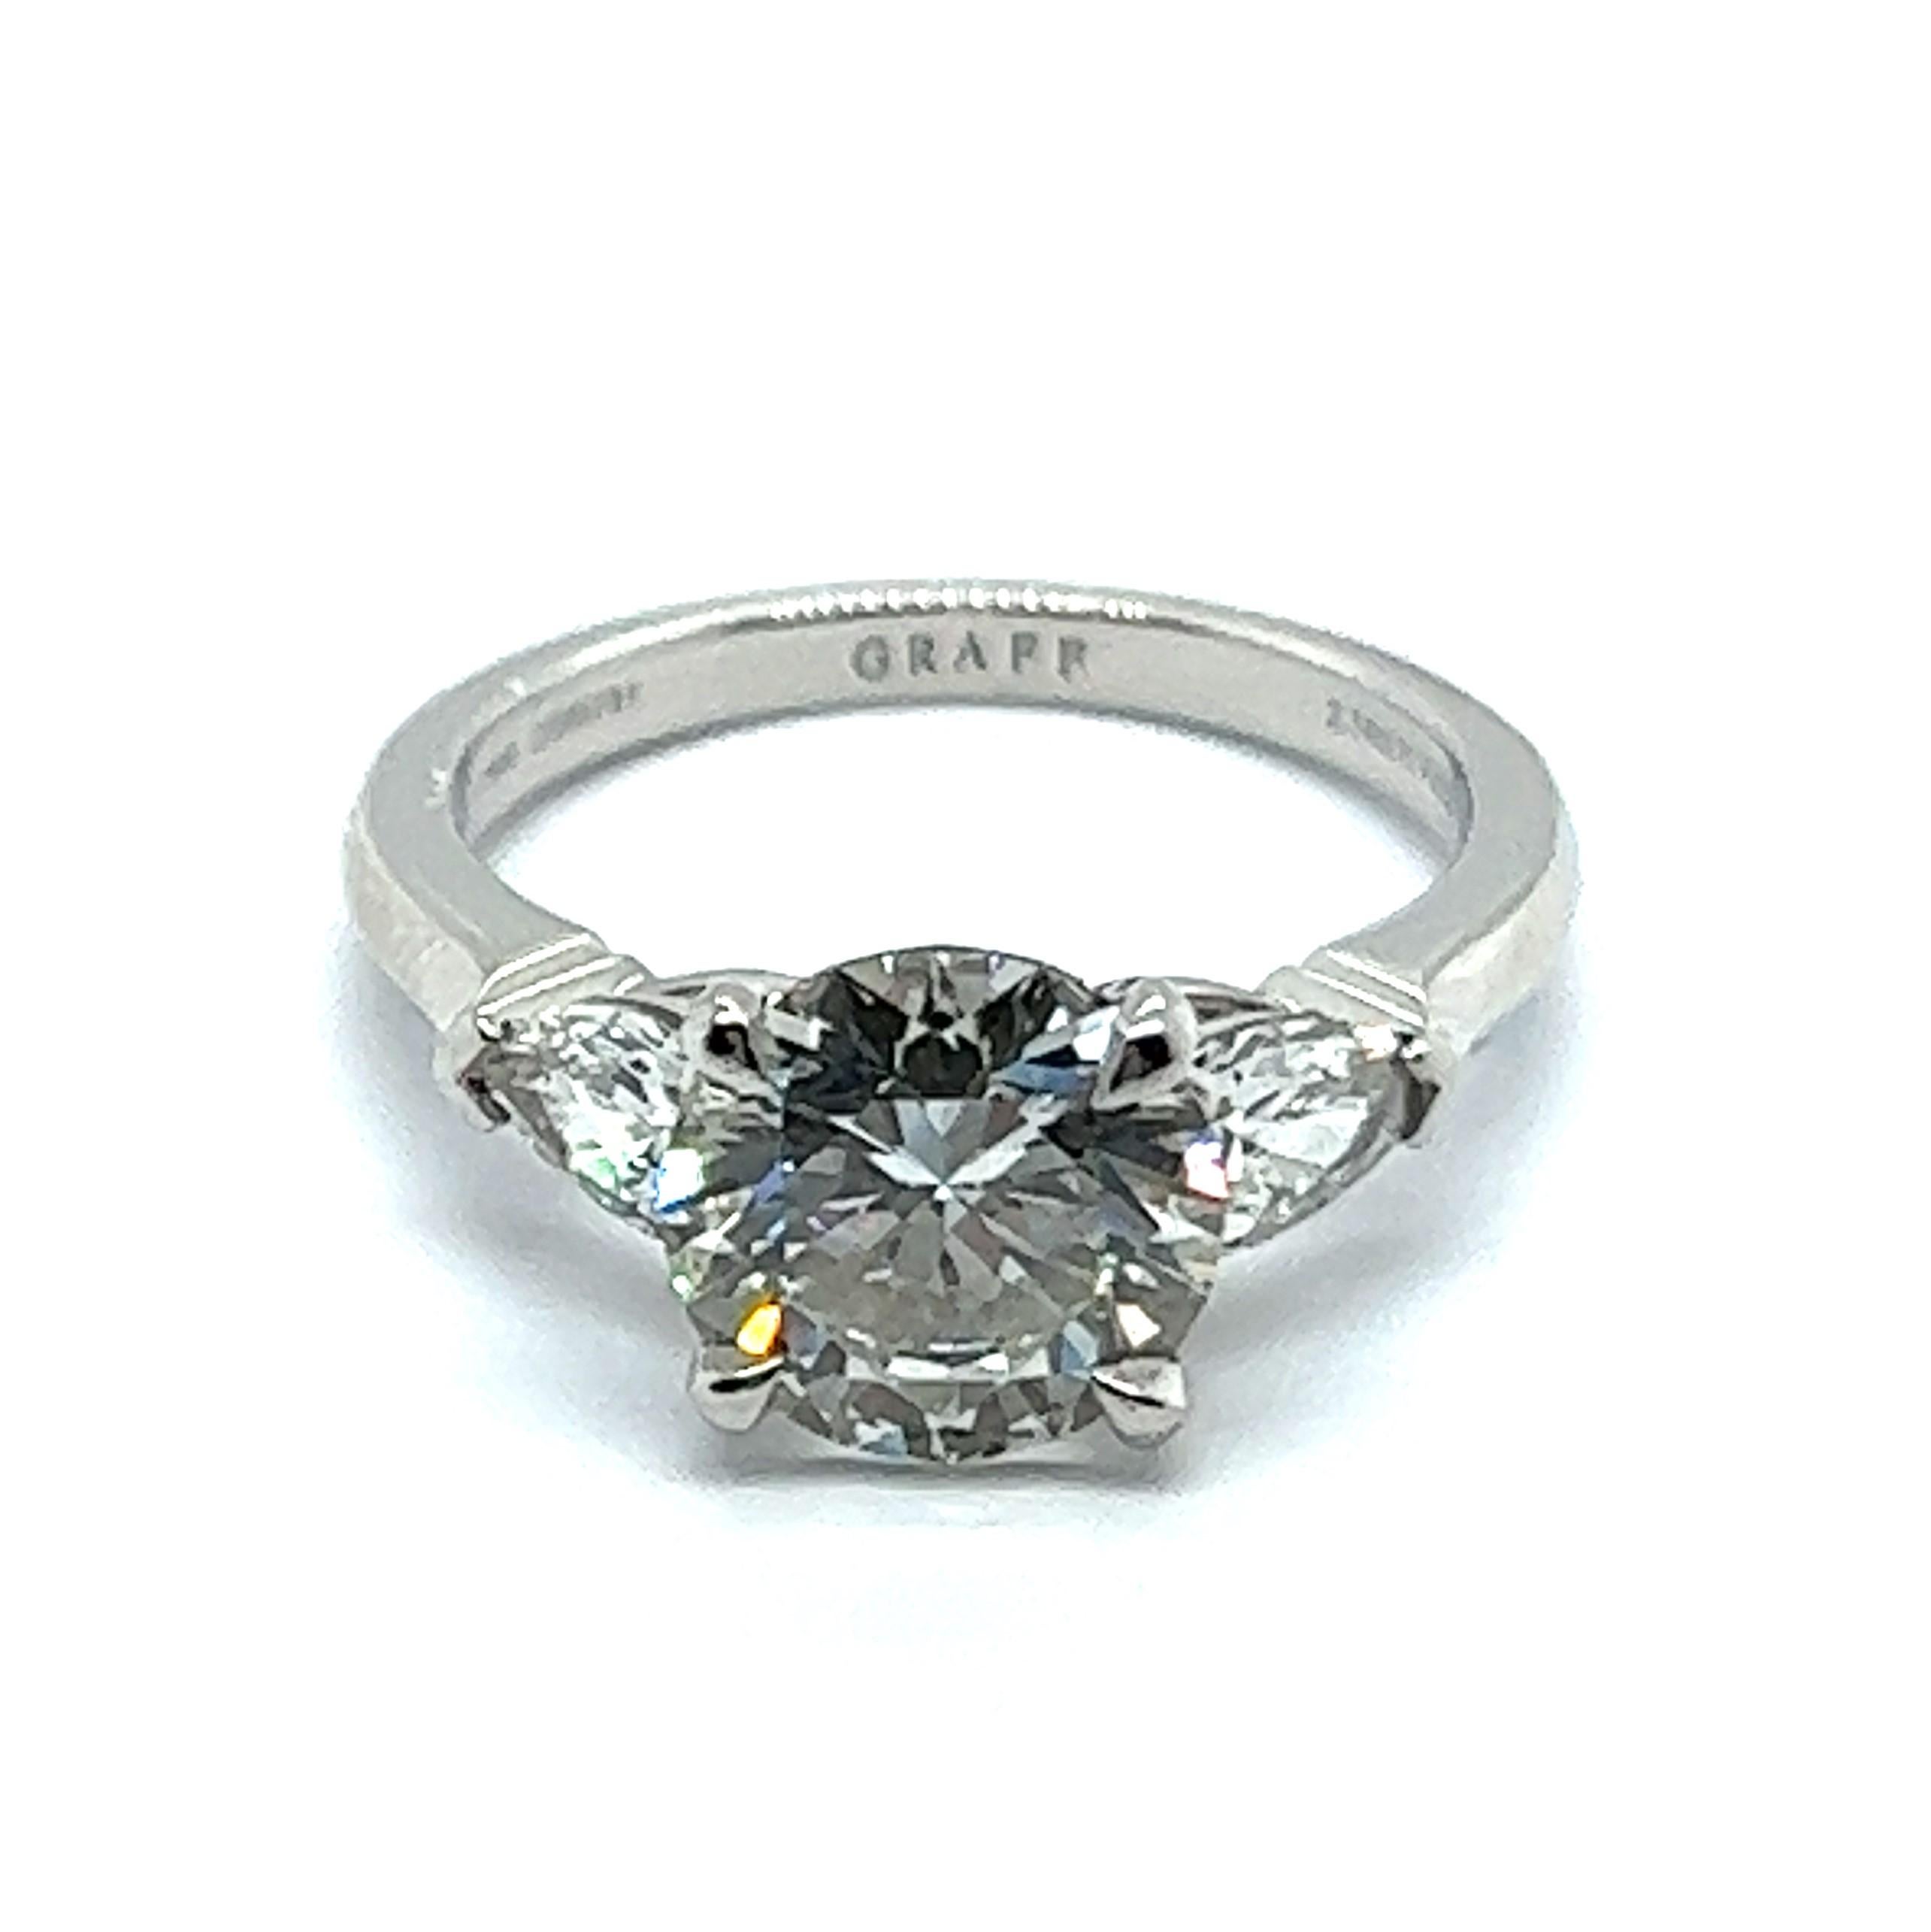 Exceptional 2.34 Carat GIA Certified Diamond Ring in Platinum by Graff In Excellent Condition For Sale In Lucerne, CH